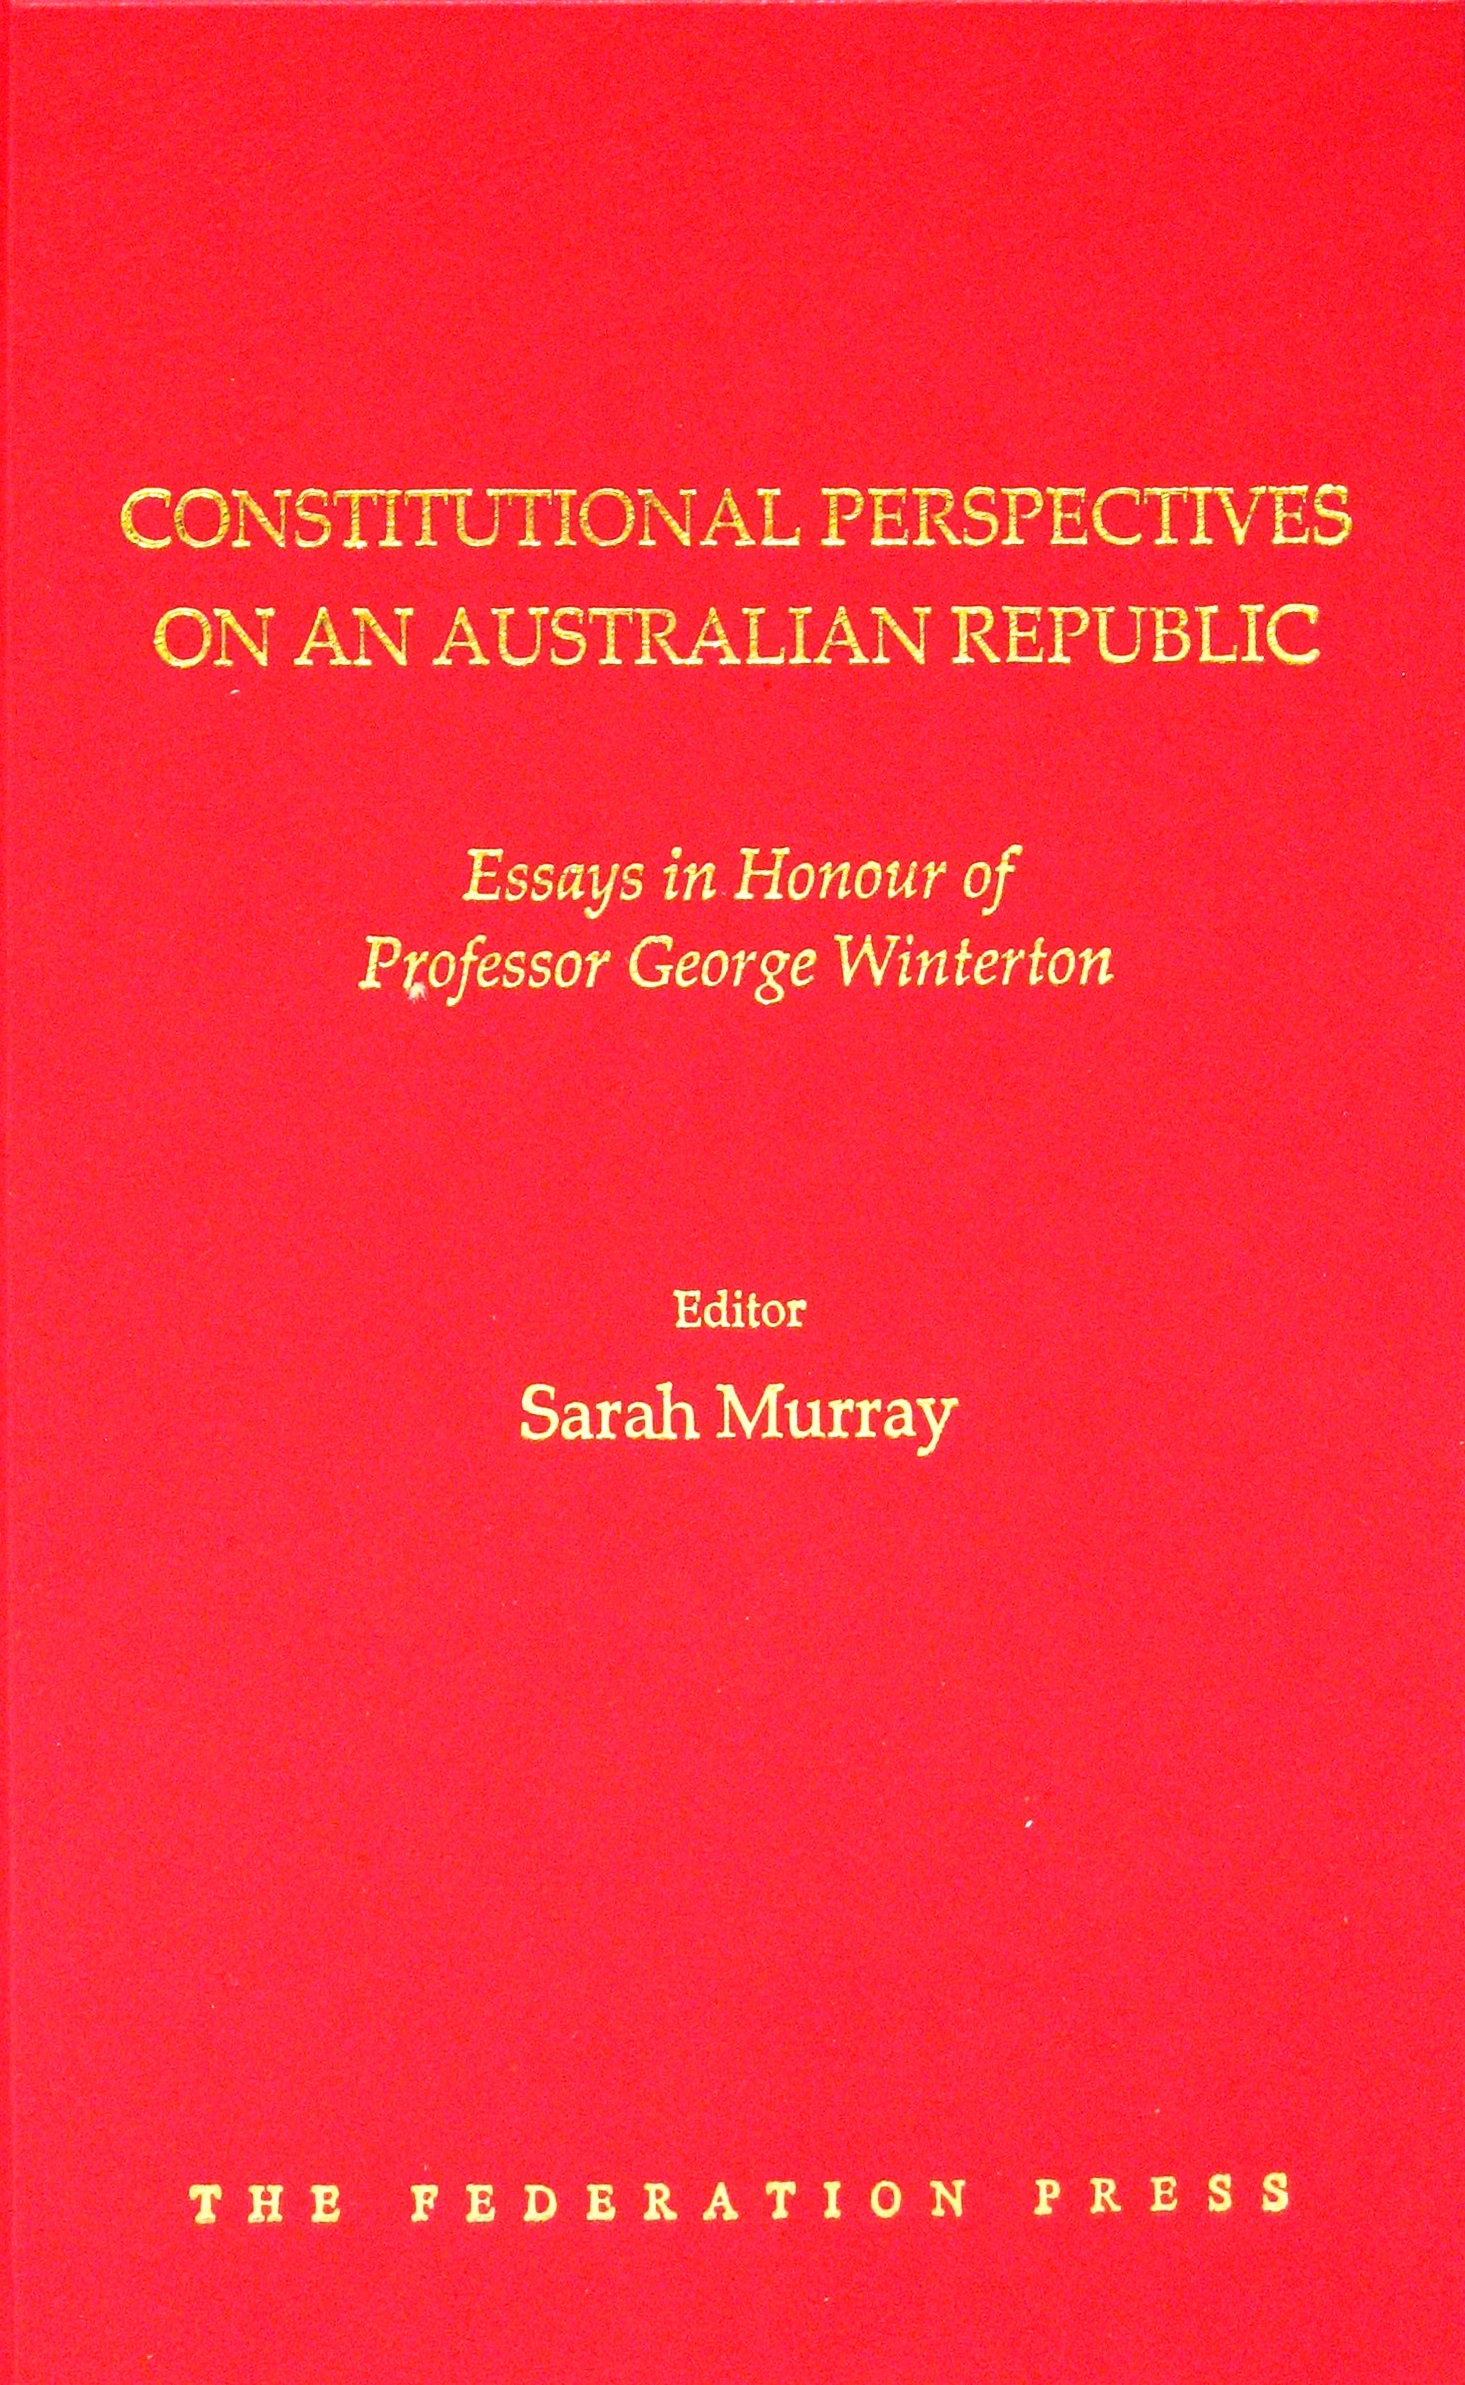 Constitutional Perspectives on an Australian Republic